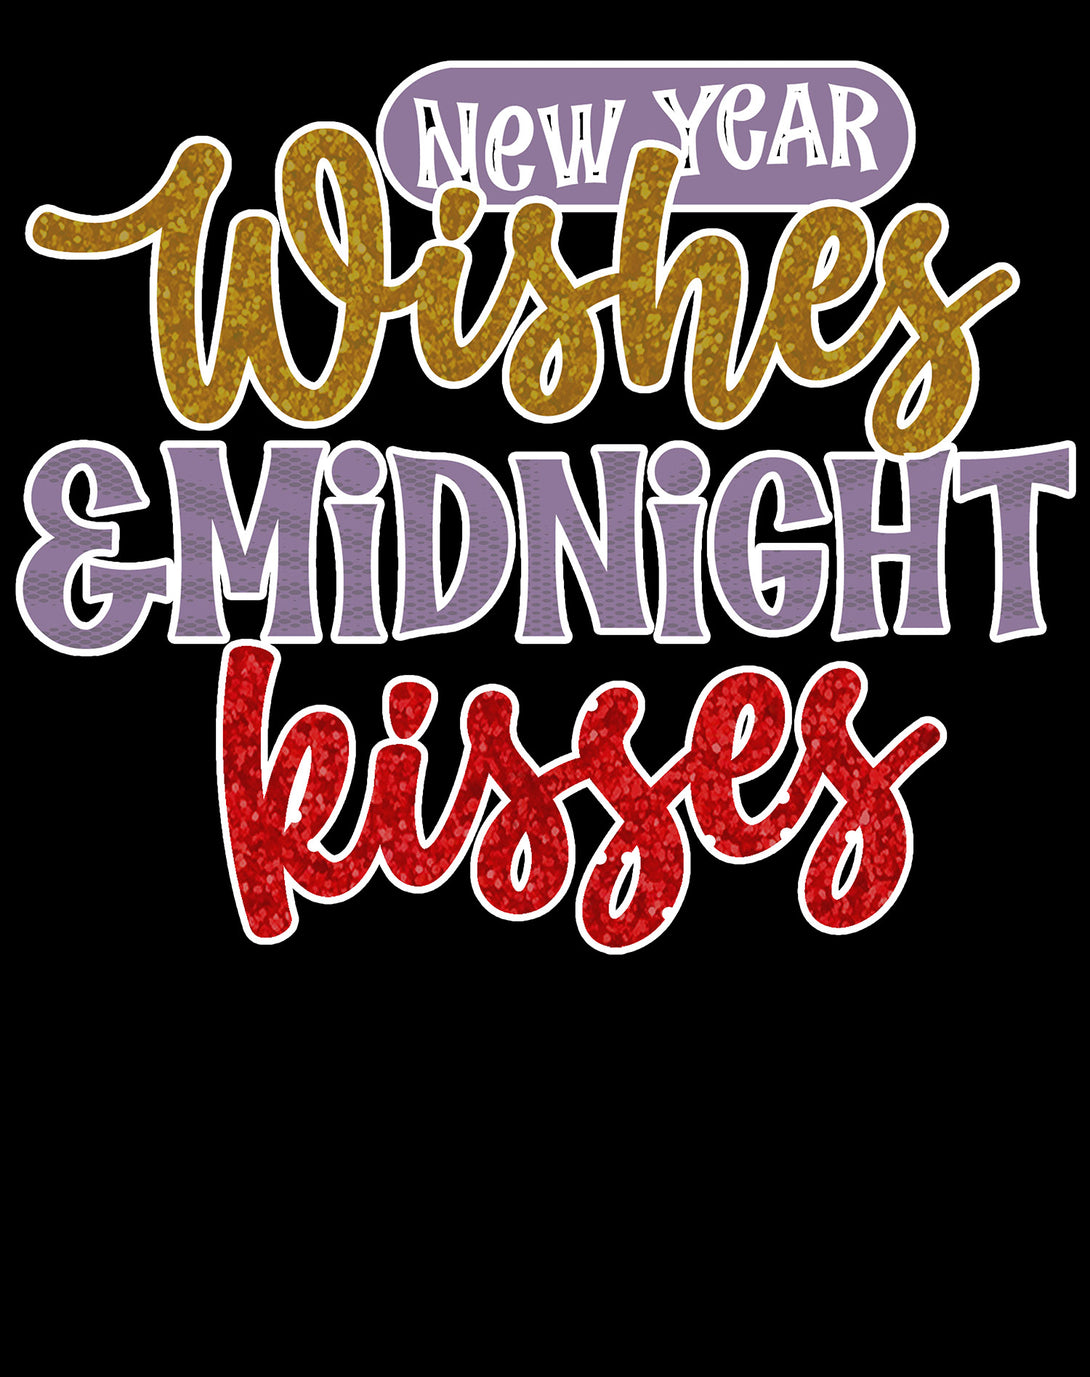 NYE New Year Wishes Midnight Kisses Eve Party Cute Couples Women's T-Shirt Black - Urban Species Design Close Up